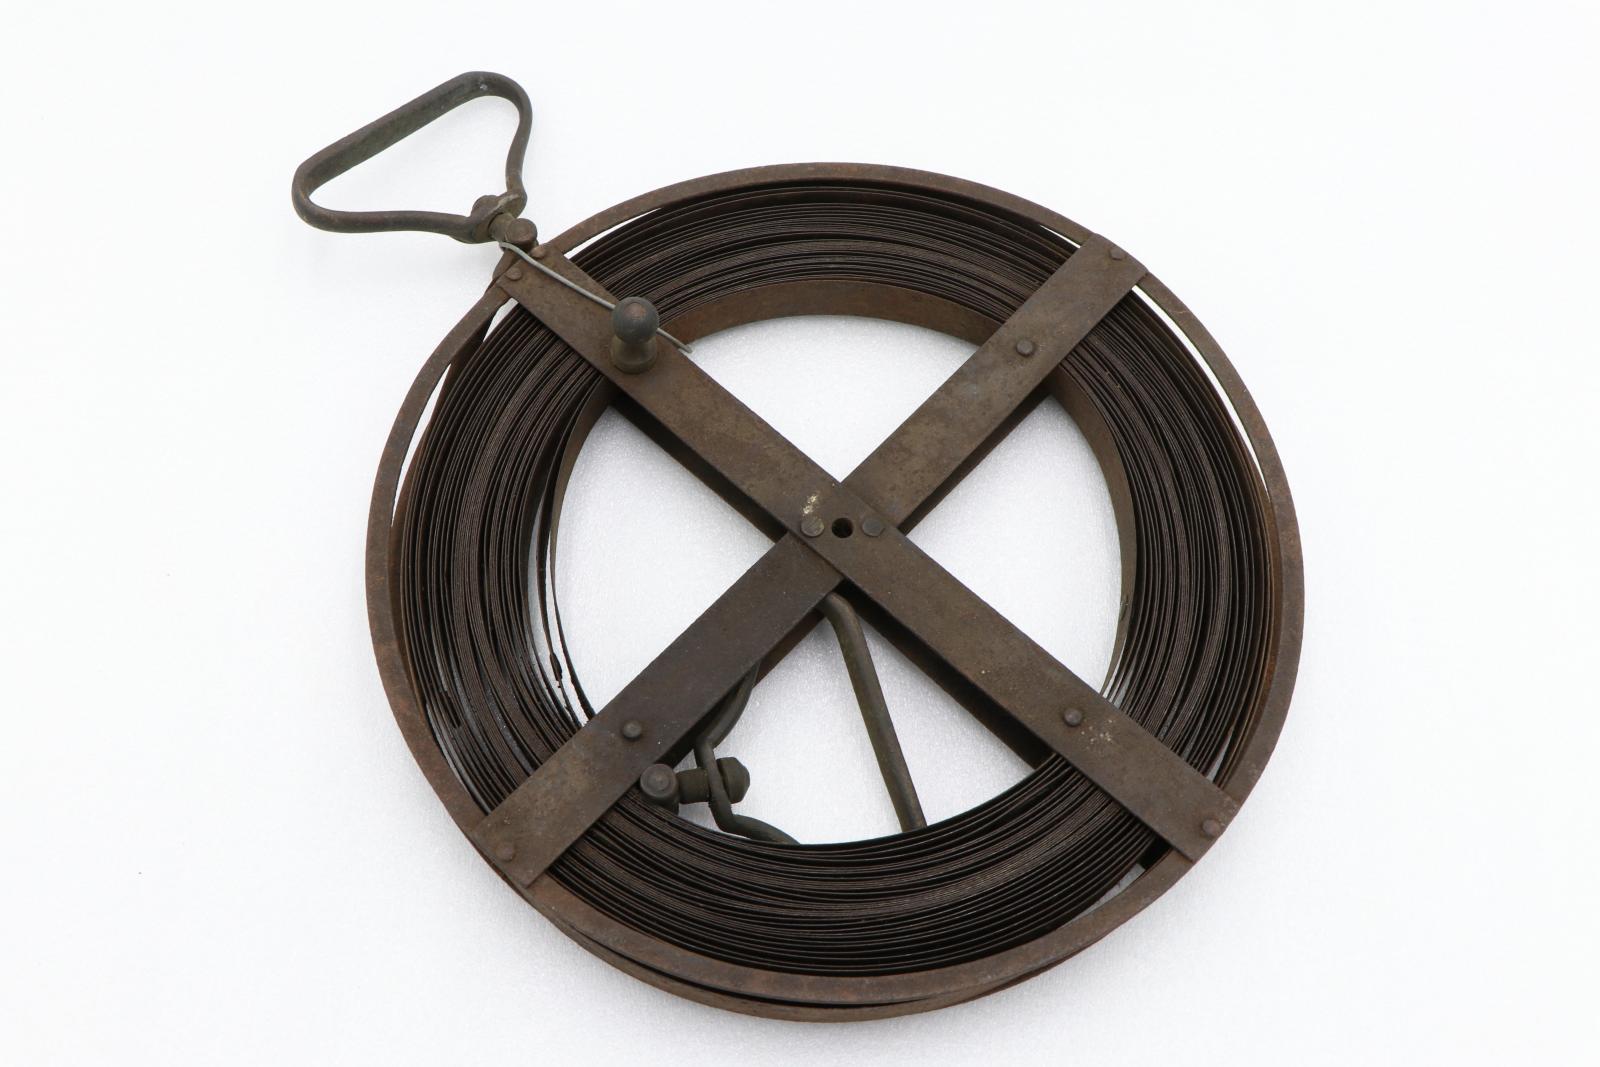 Thin steel tape rolled up on dark metal wheel reinforced with bars to create an X across. Trianglar metal handle on one end of tape visible within wheel. Triangular handle on other end of tape protrudes from top of wheel.